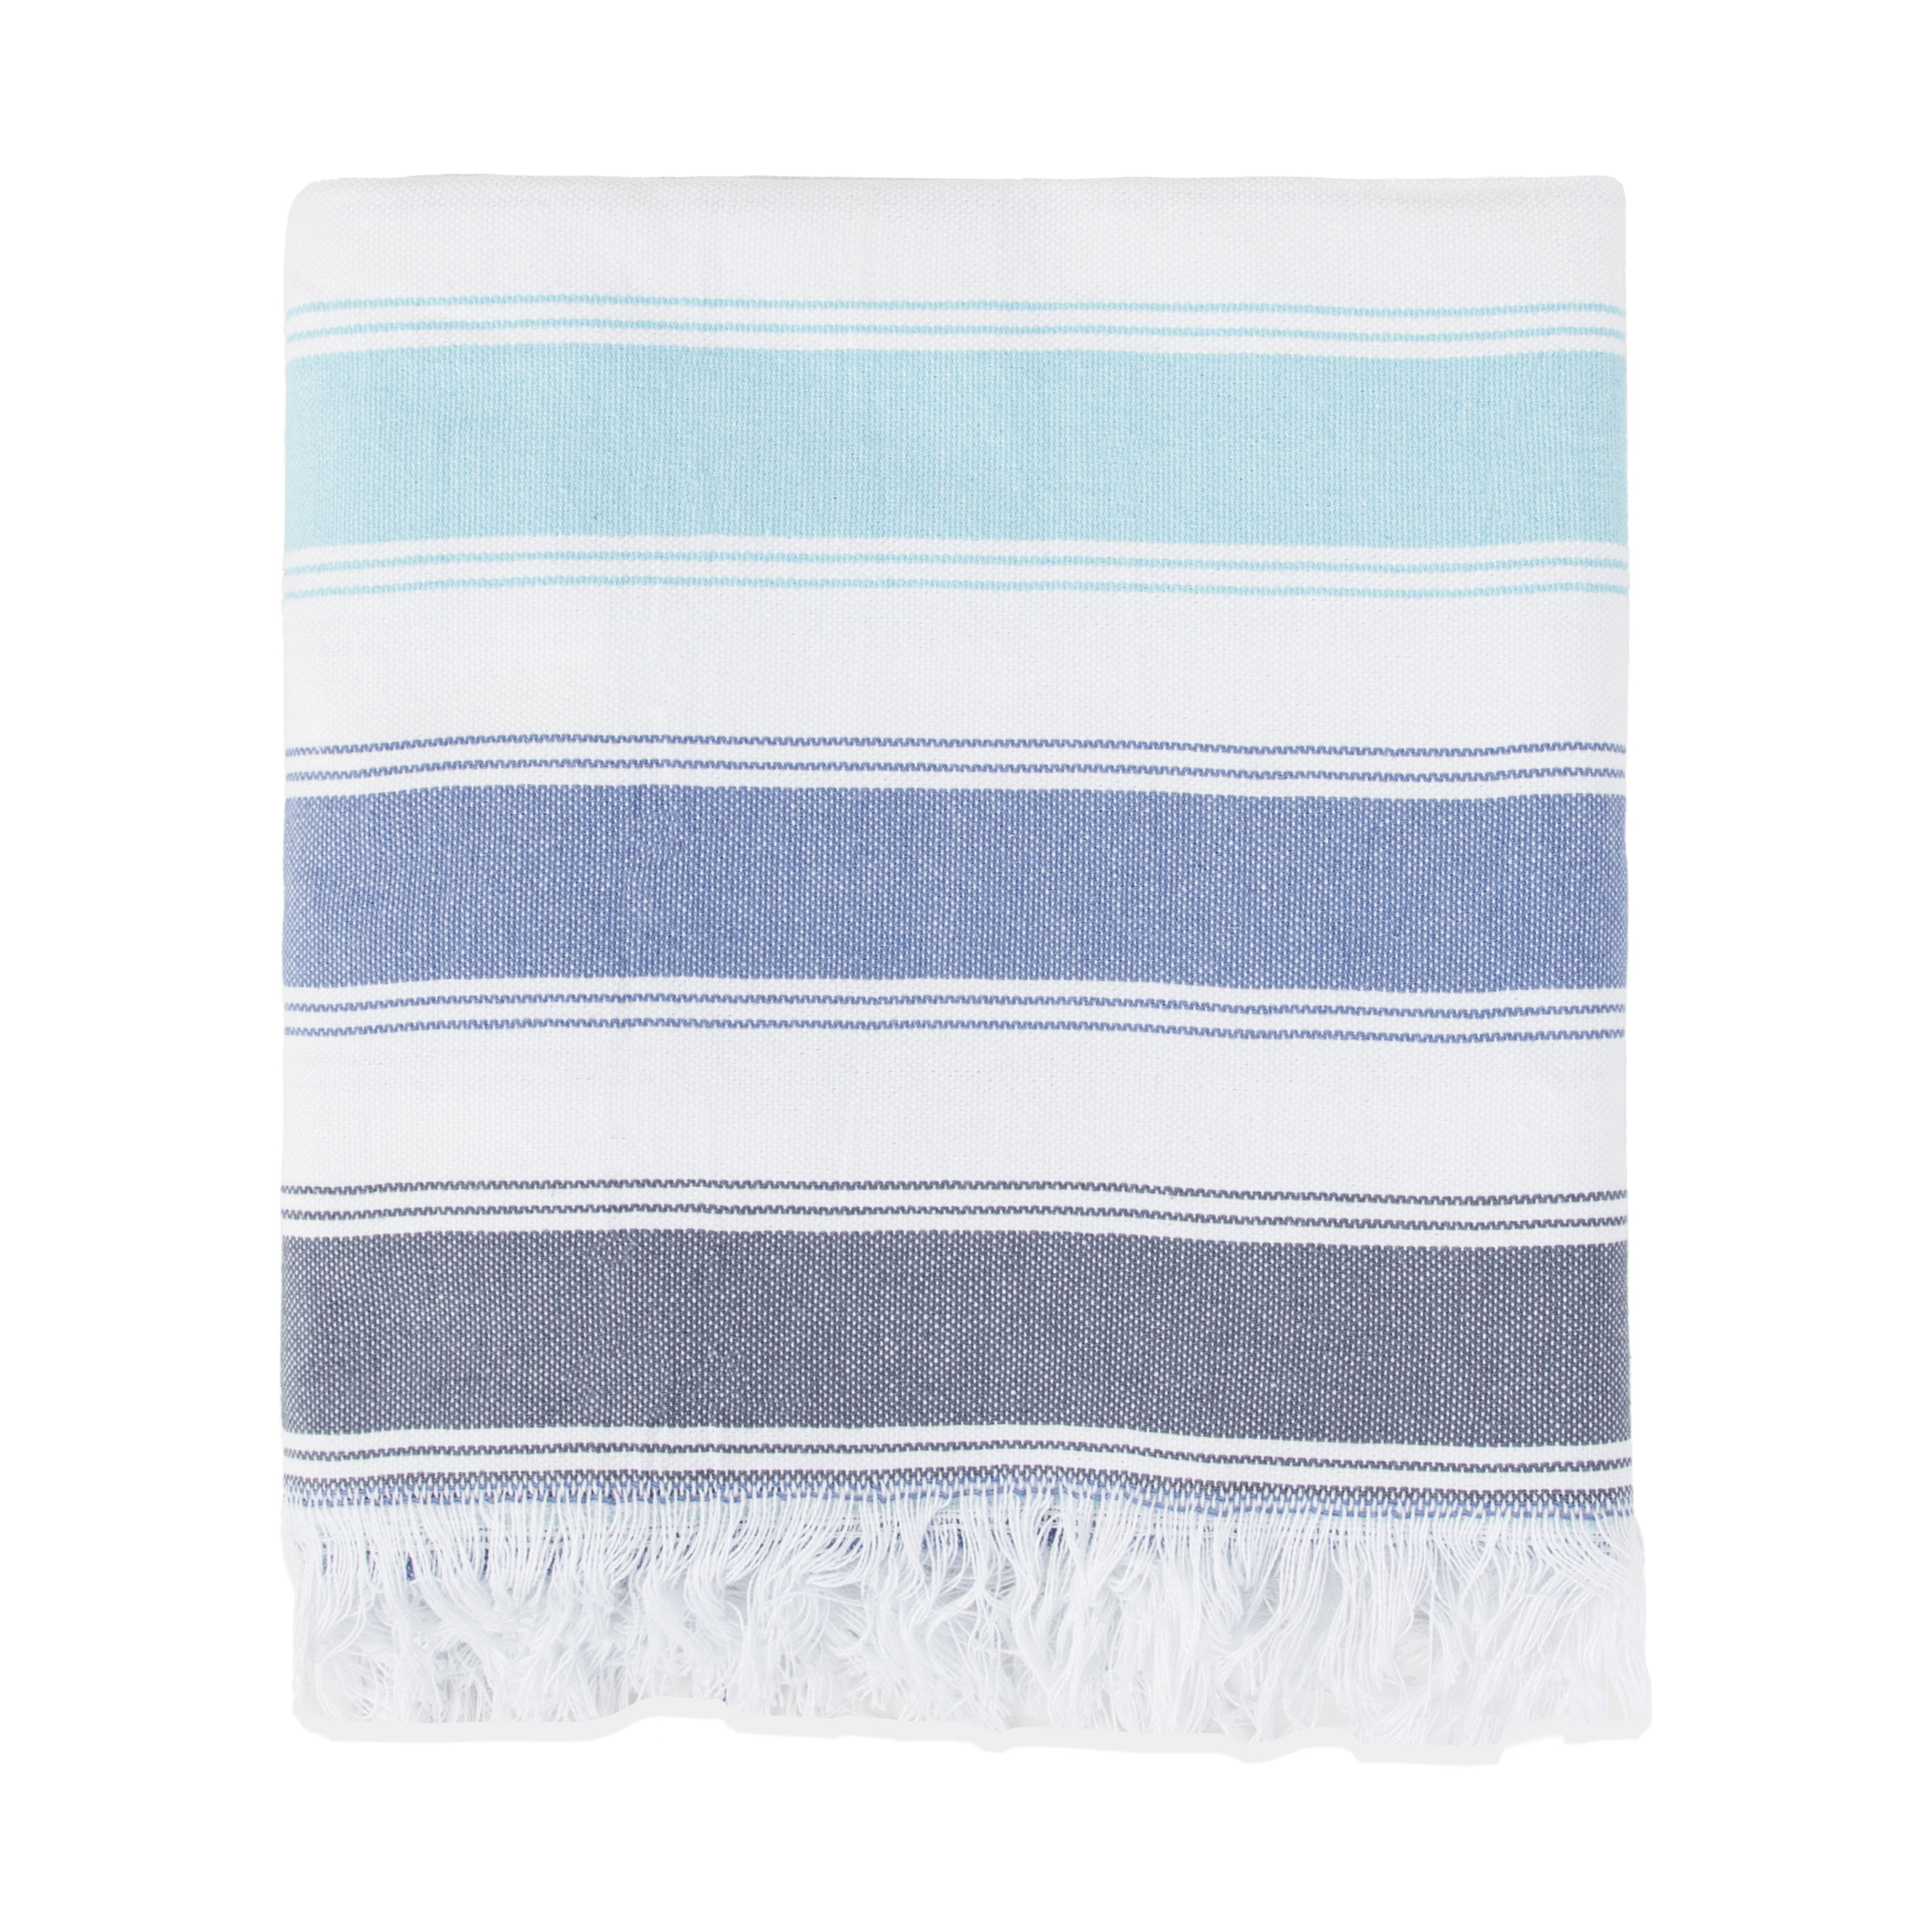 Beach Towel Set of 6 with Chair Band - 100% Cotton 39x70 - Oversized  Turkish Bath Towels 6 Pack - Quick Dry Sandfree Lightweight Large Giftable  Pool